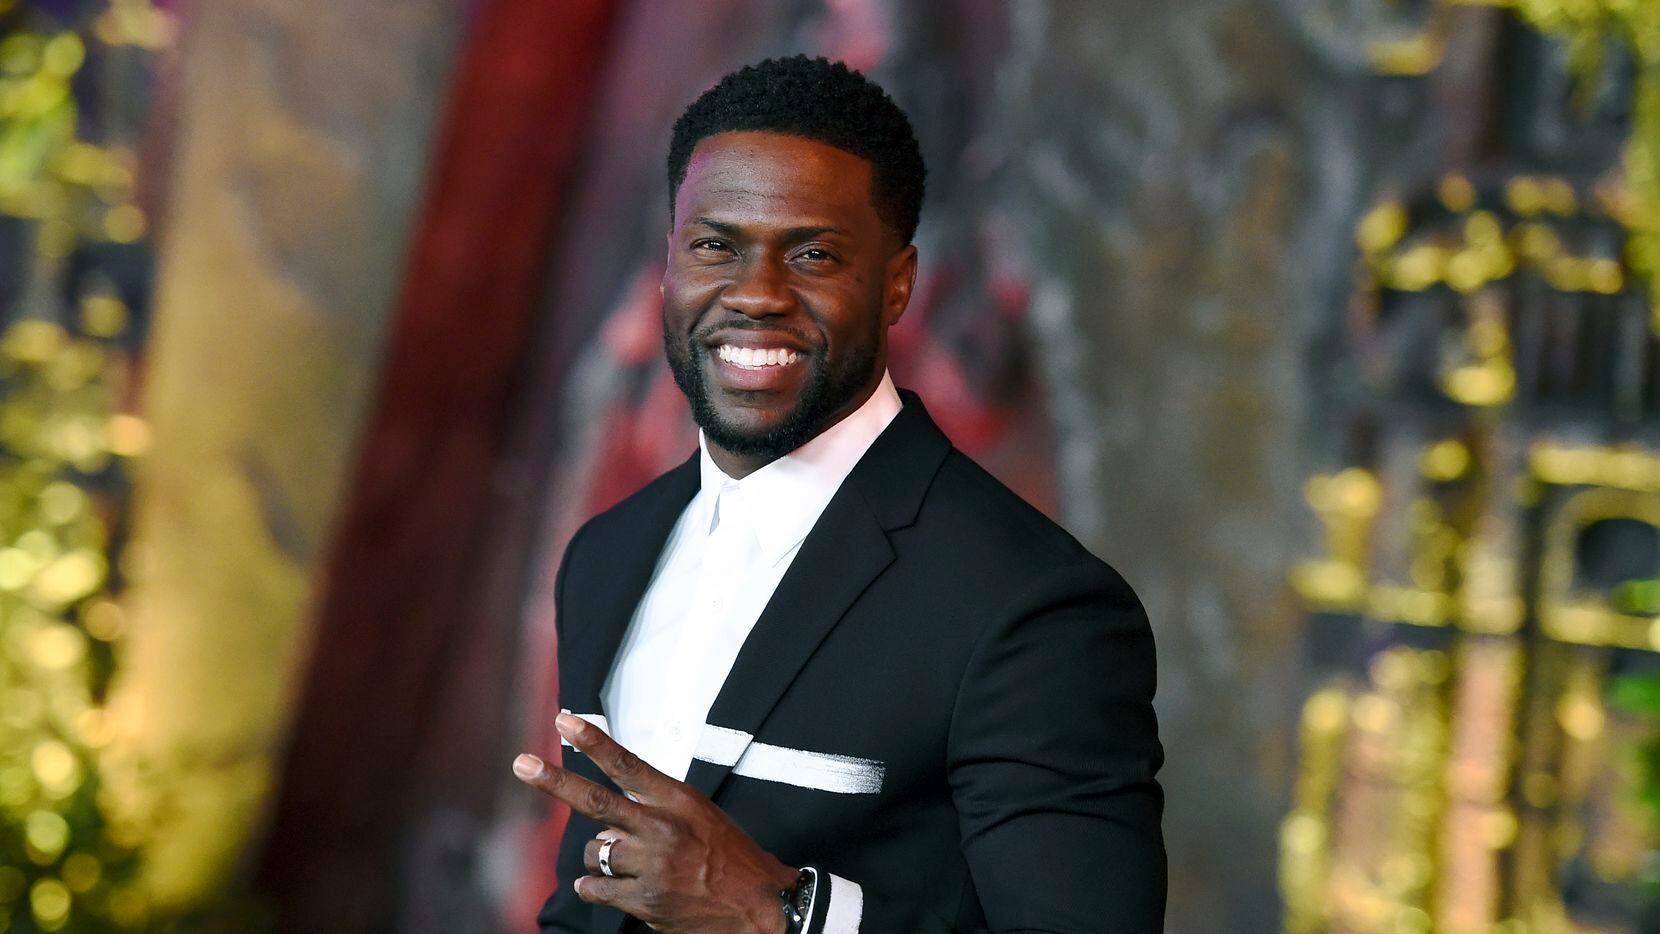 Comedian and actor Kevin Hart made several stops in Dallas during his two-day comedy tour...